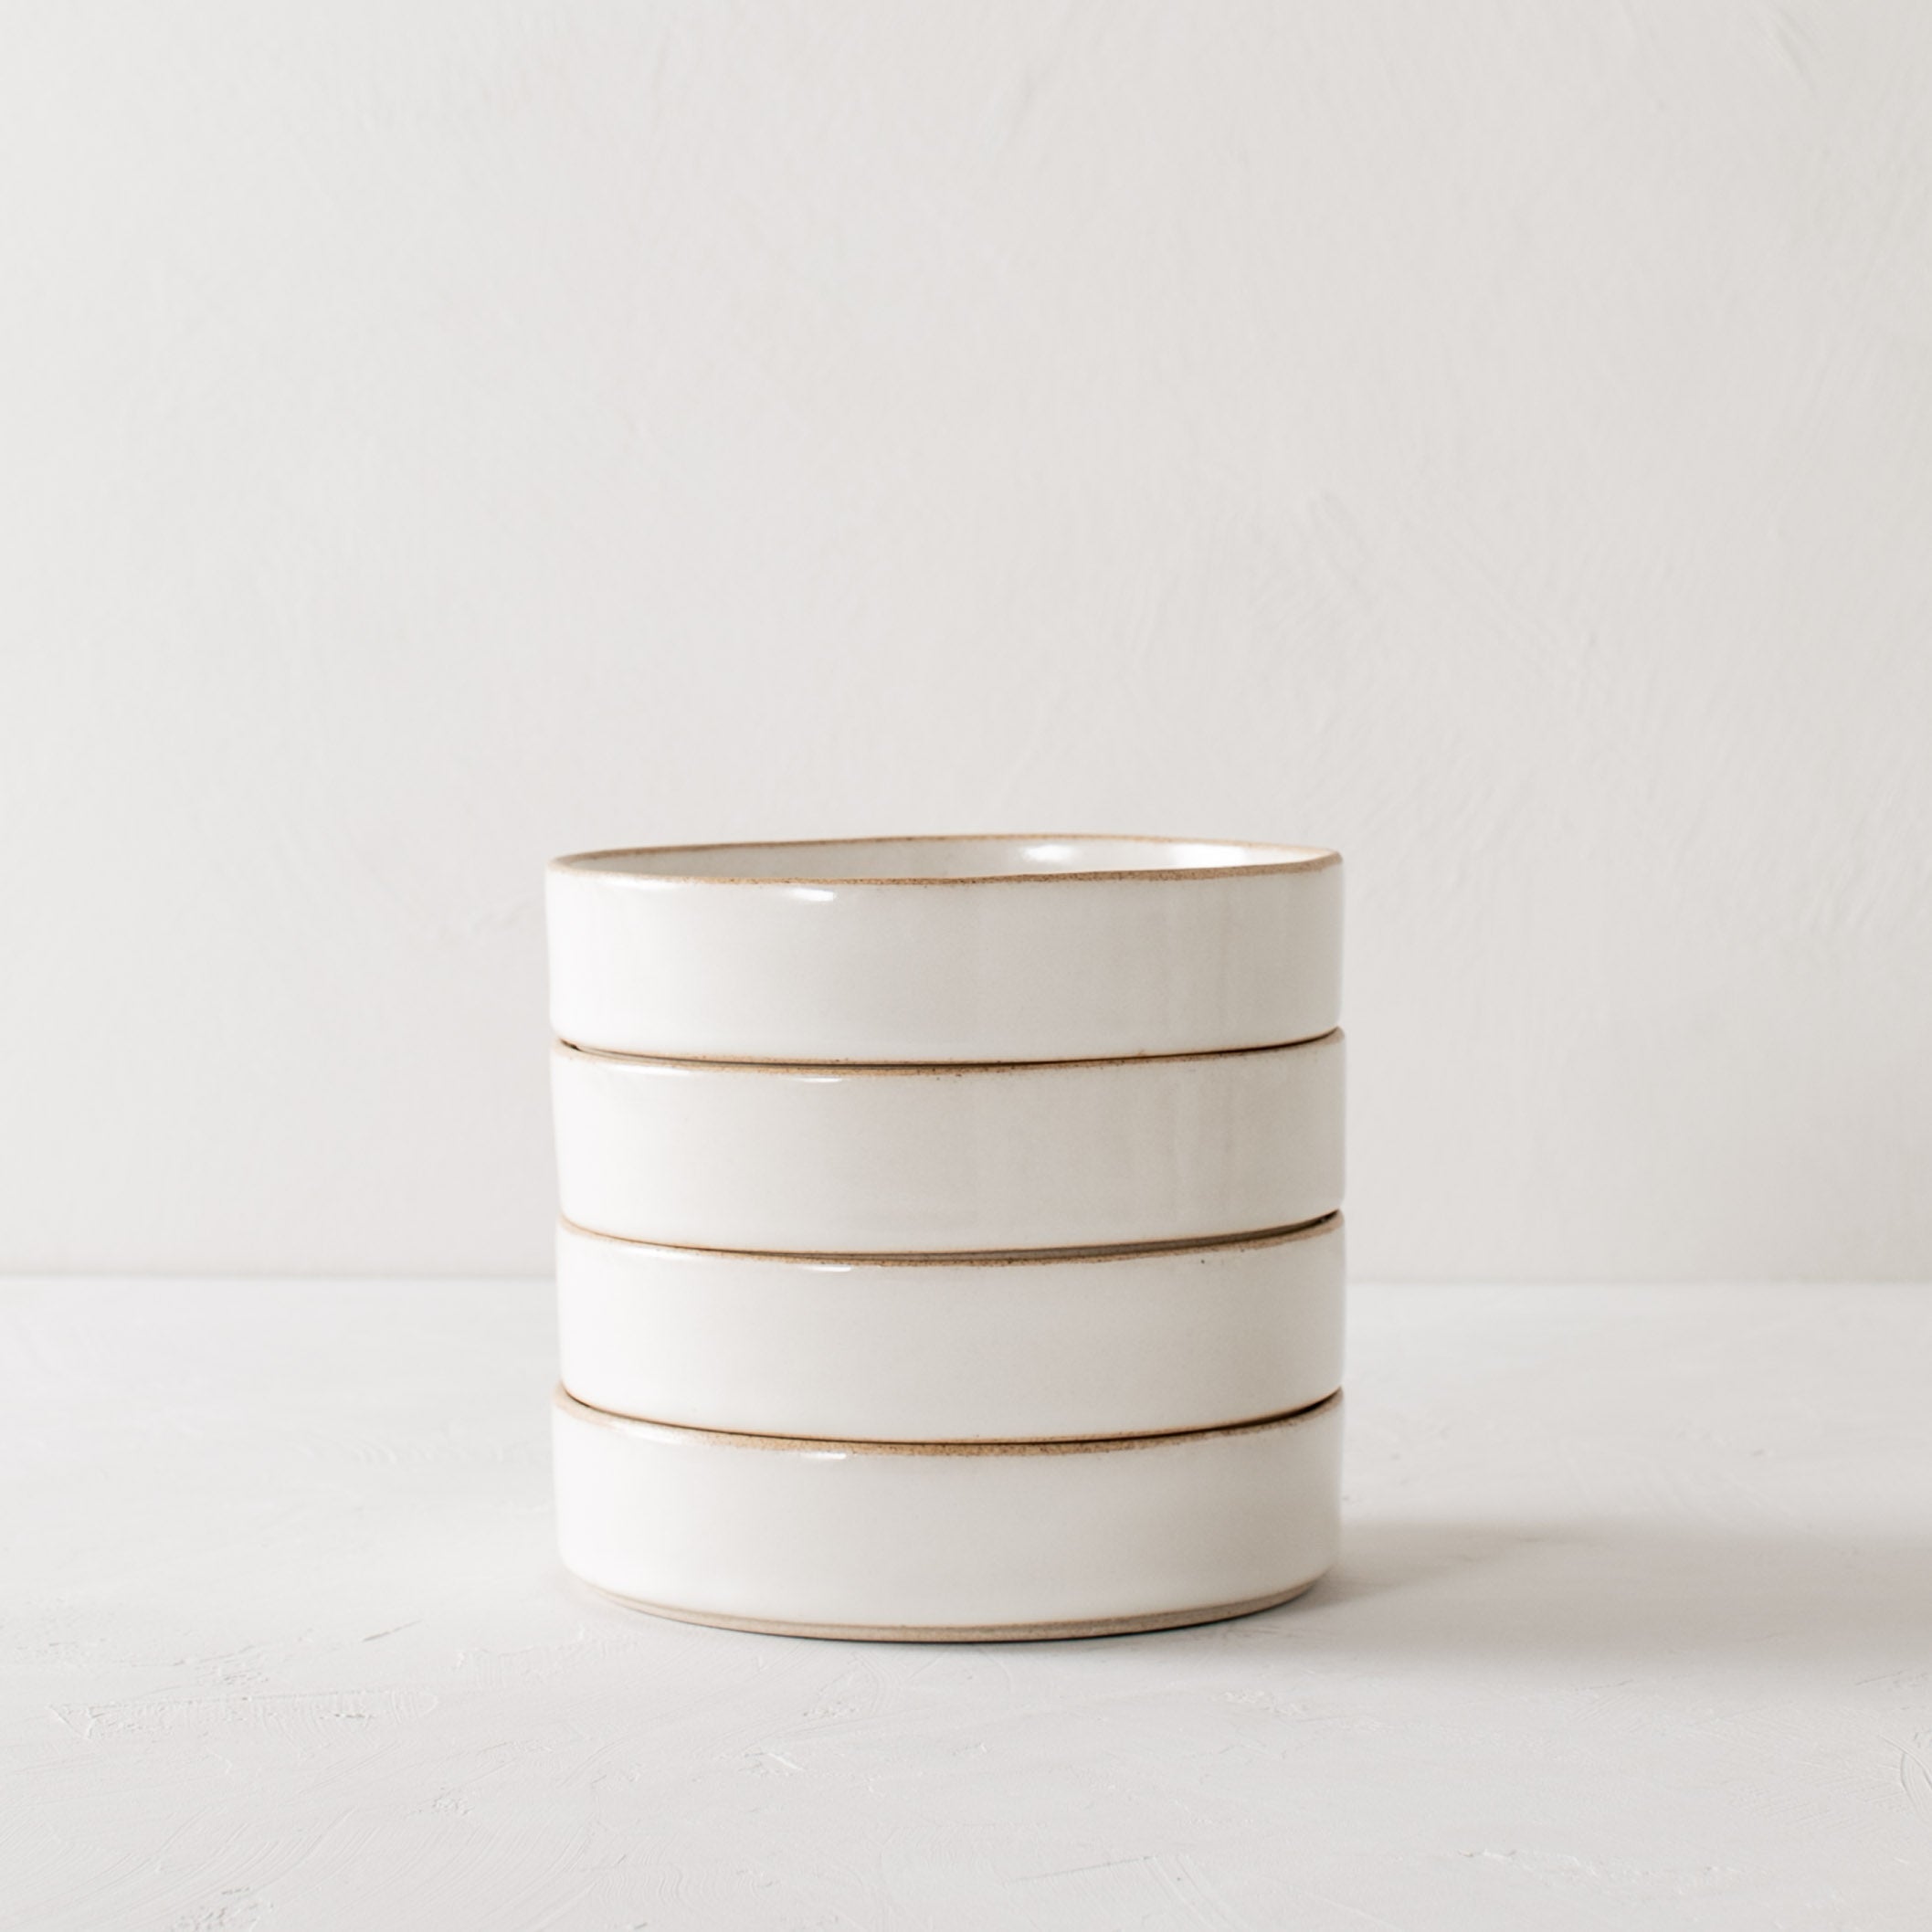 Stack of four minimal white ceramic minimal salad dishes. Dishes have exposed stoneware rims and bases. Handmade salad dishes, designed and sold by Convivial Production, Kansas City ceramics.